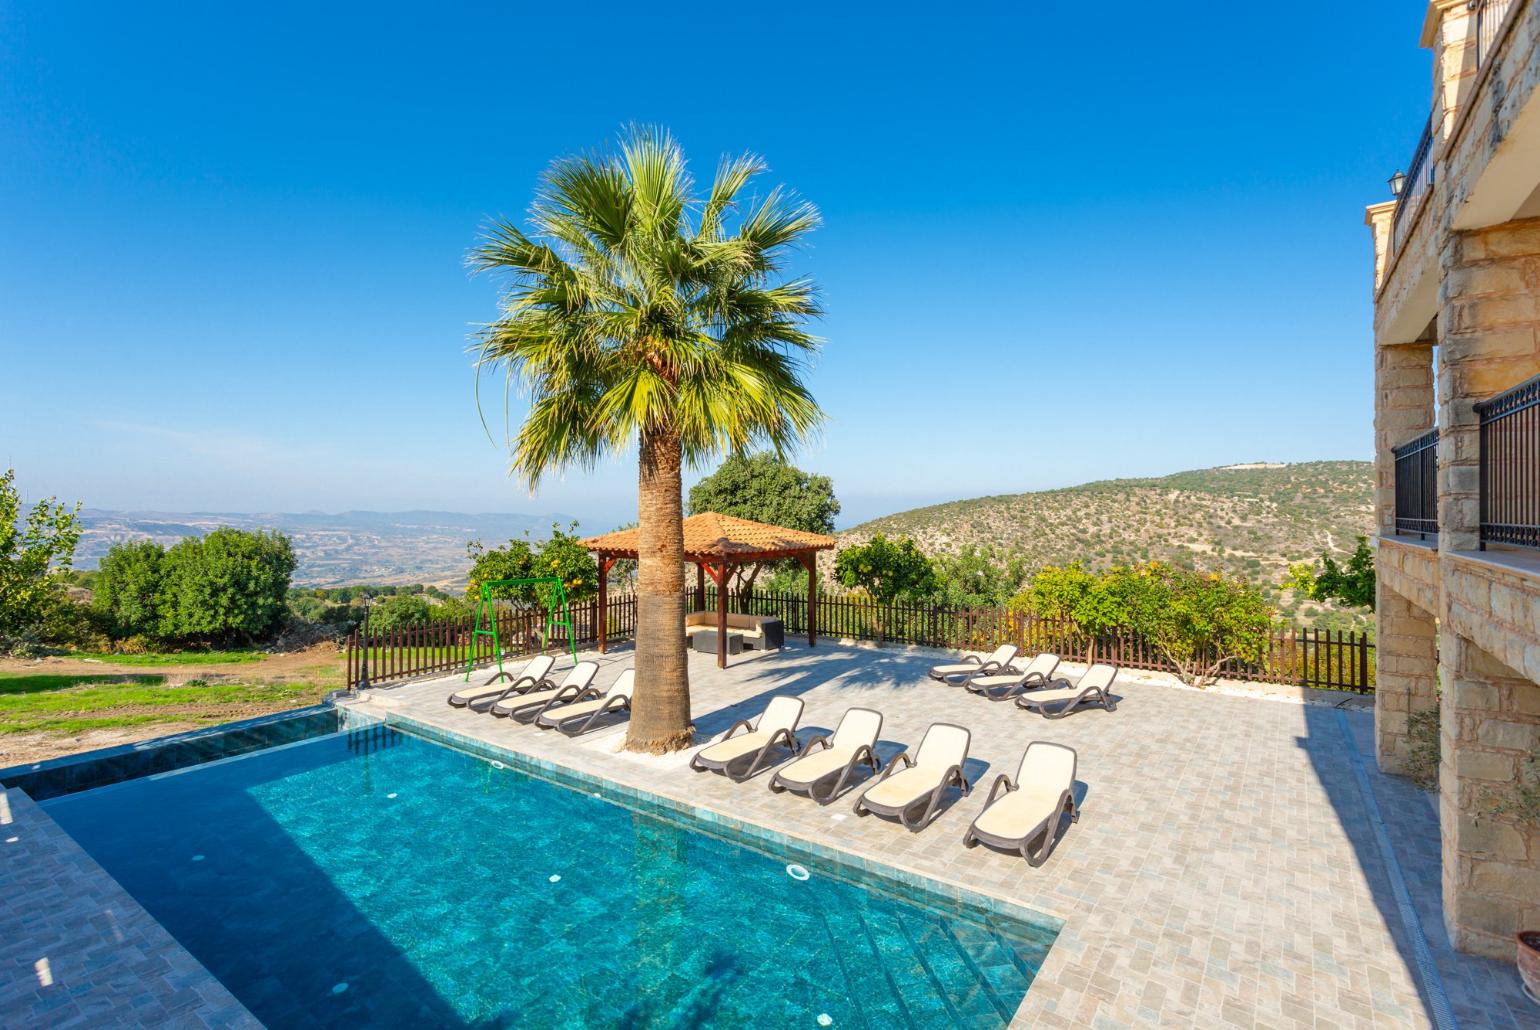 Private pool and terrace with panoramic views